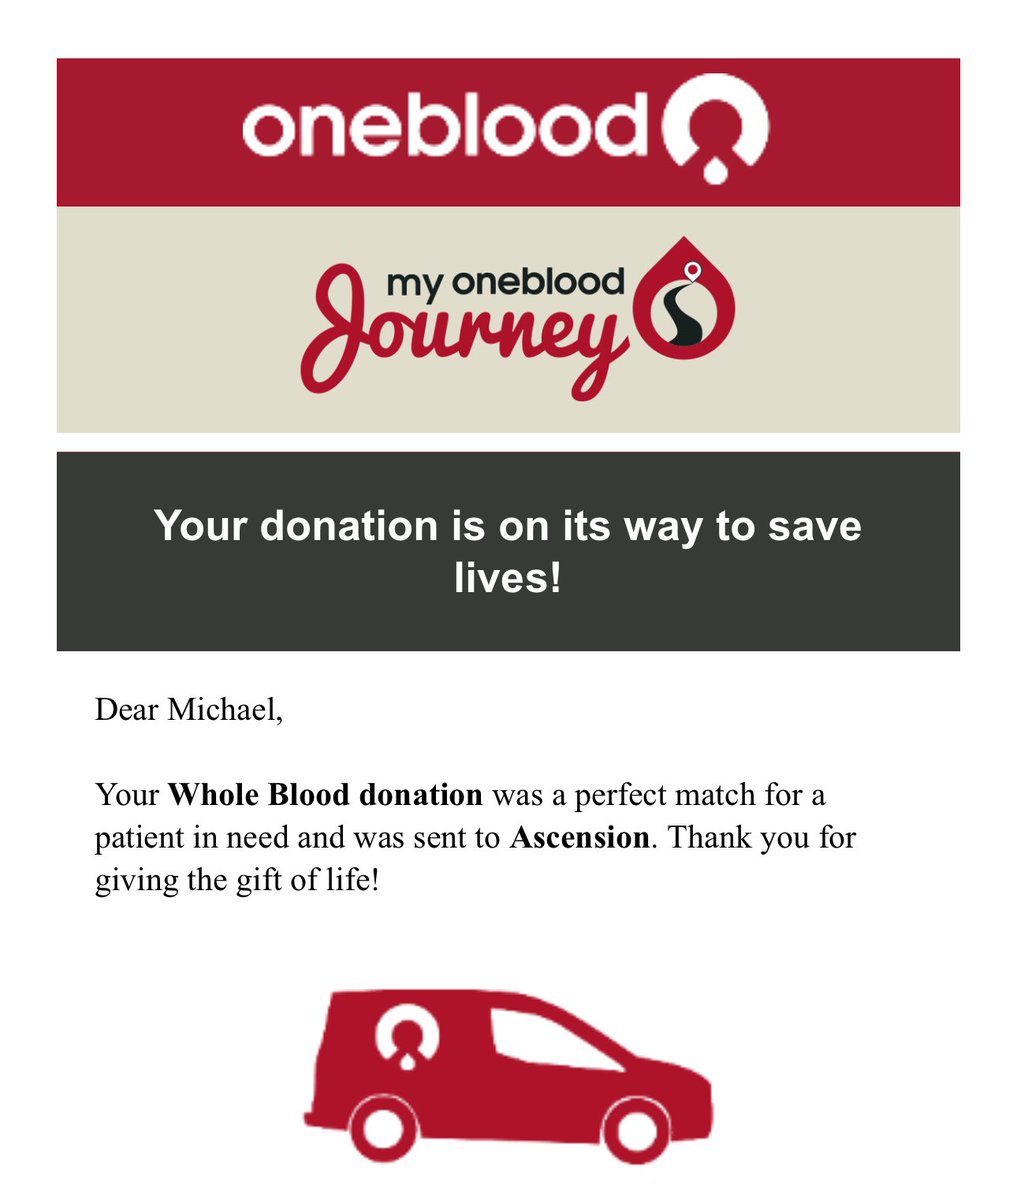 Donated blood on Thursday. It was used today. Emails like this keep me motivated to keep donating. @my1blood